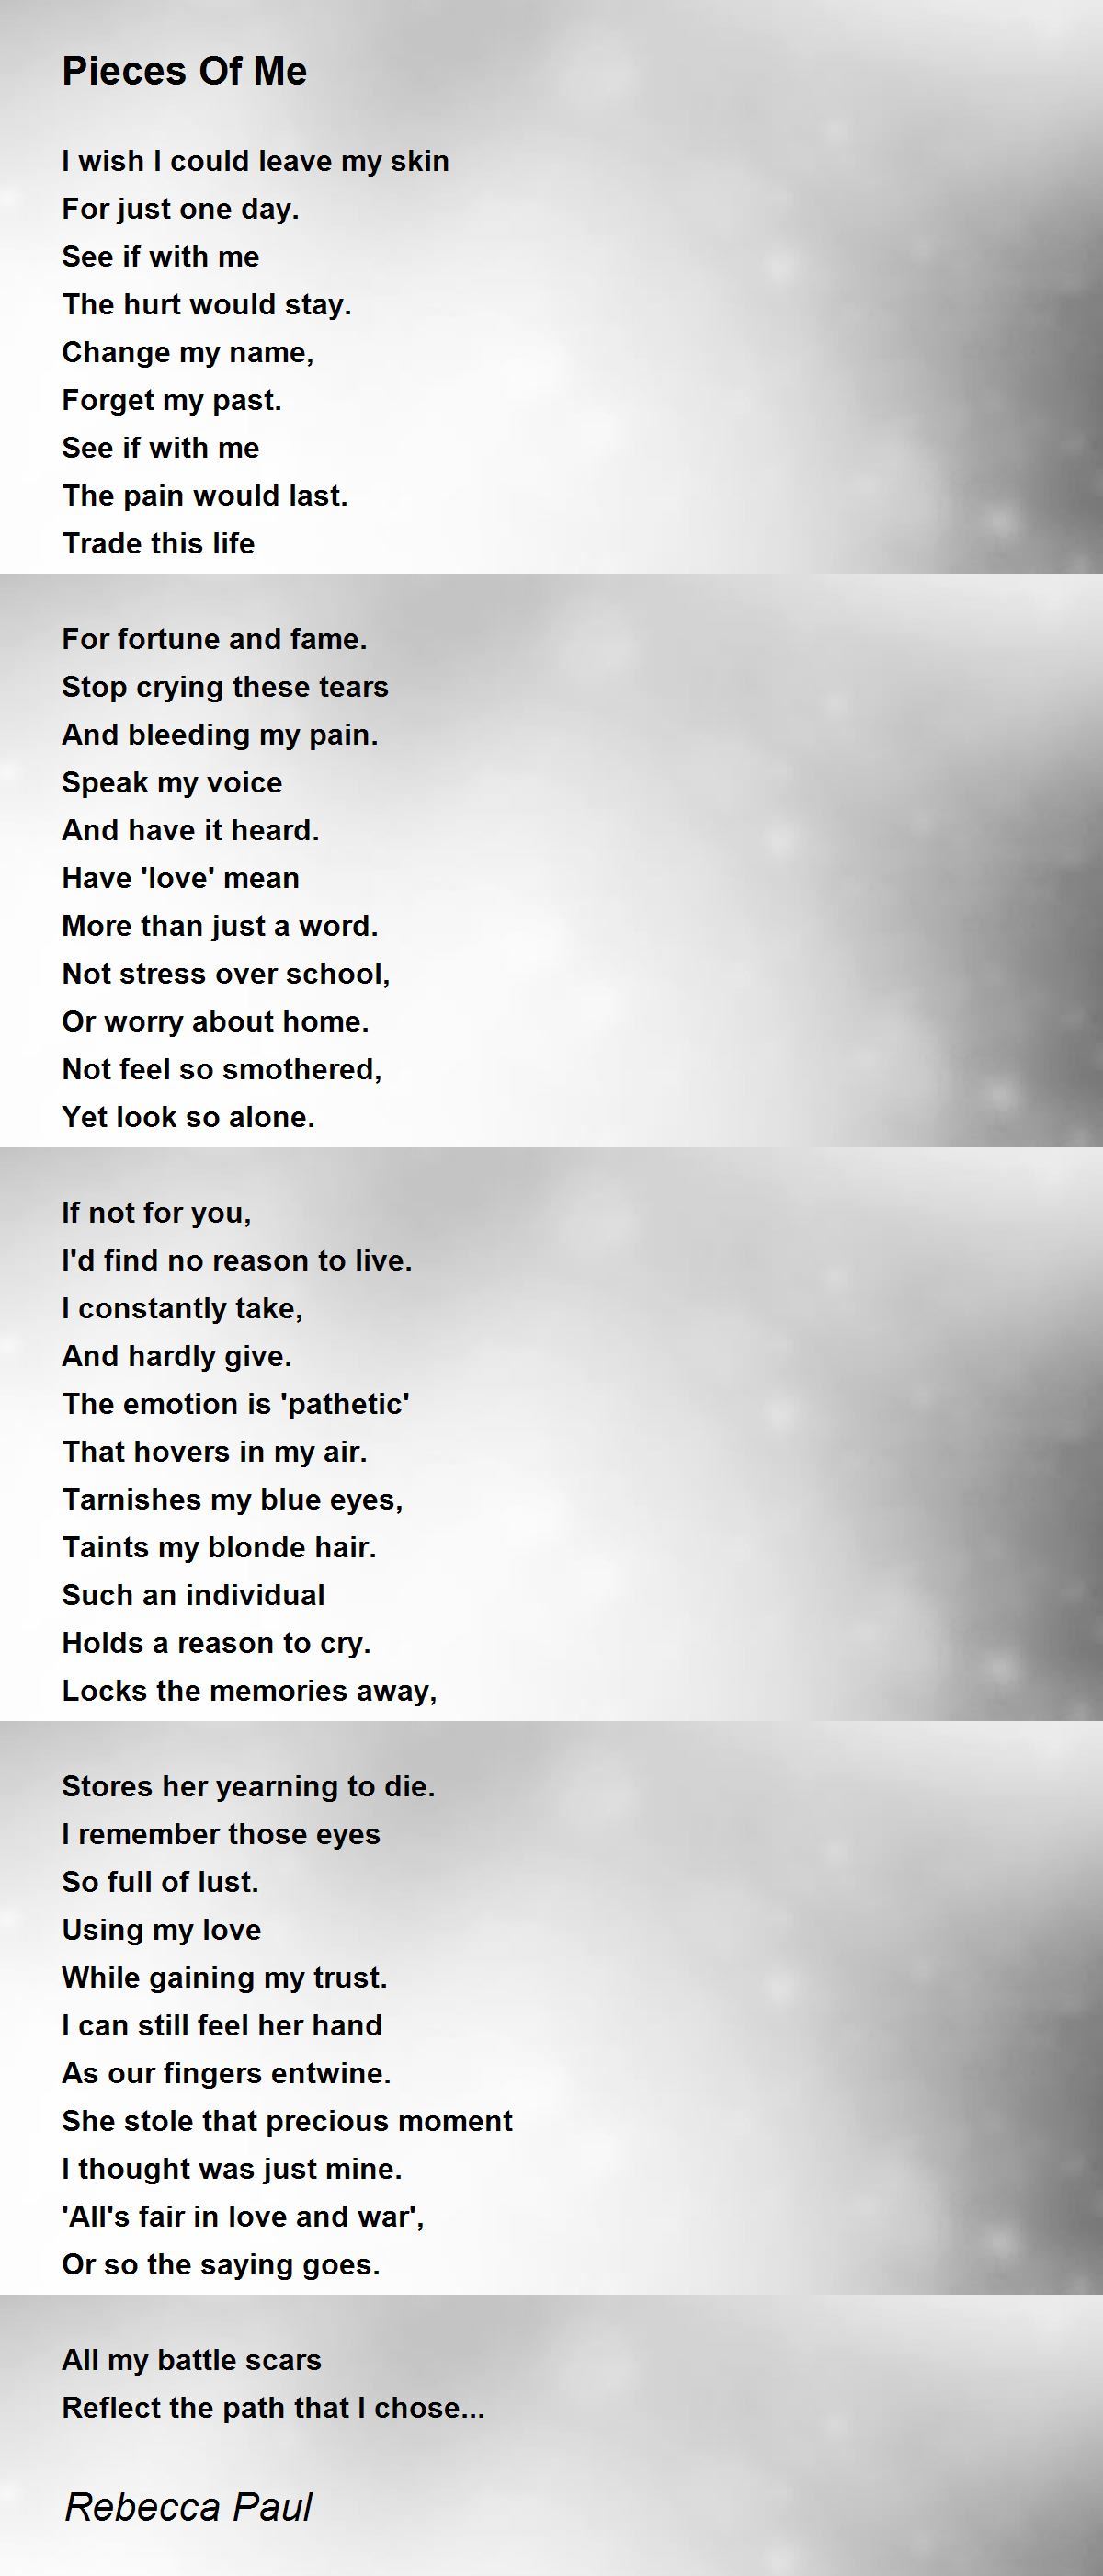 Pieces Of Me - Pieces Of Me Poem by Rebecca Paul